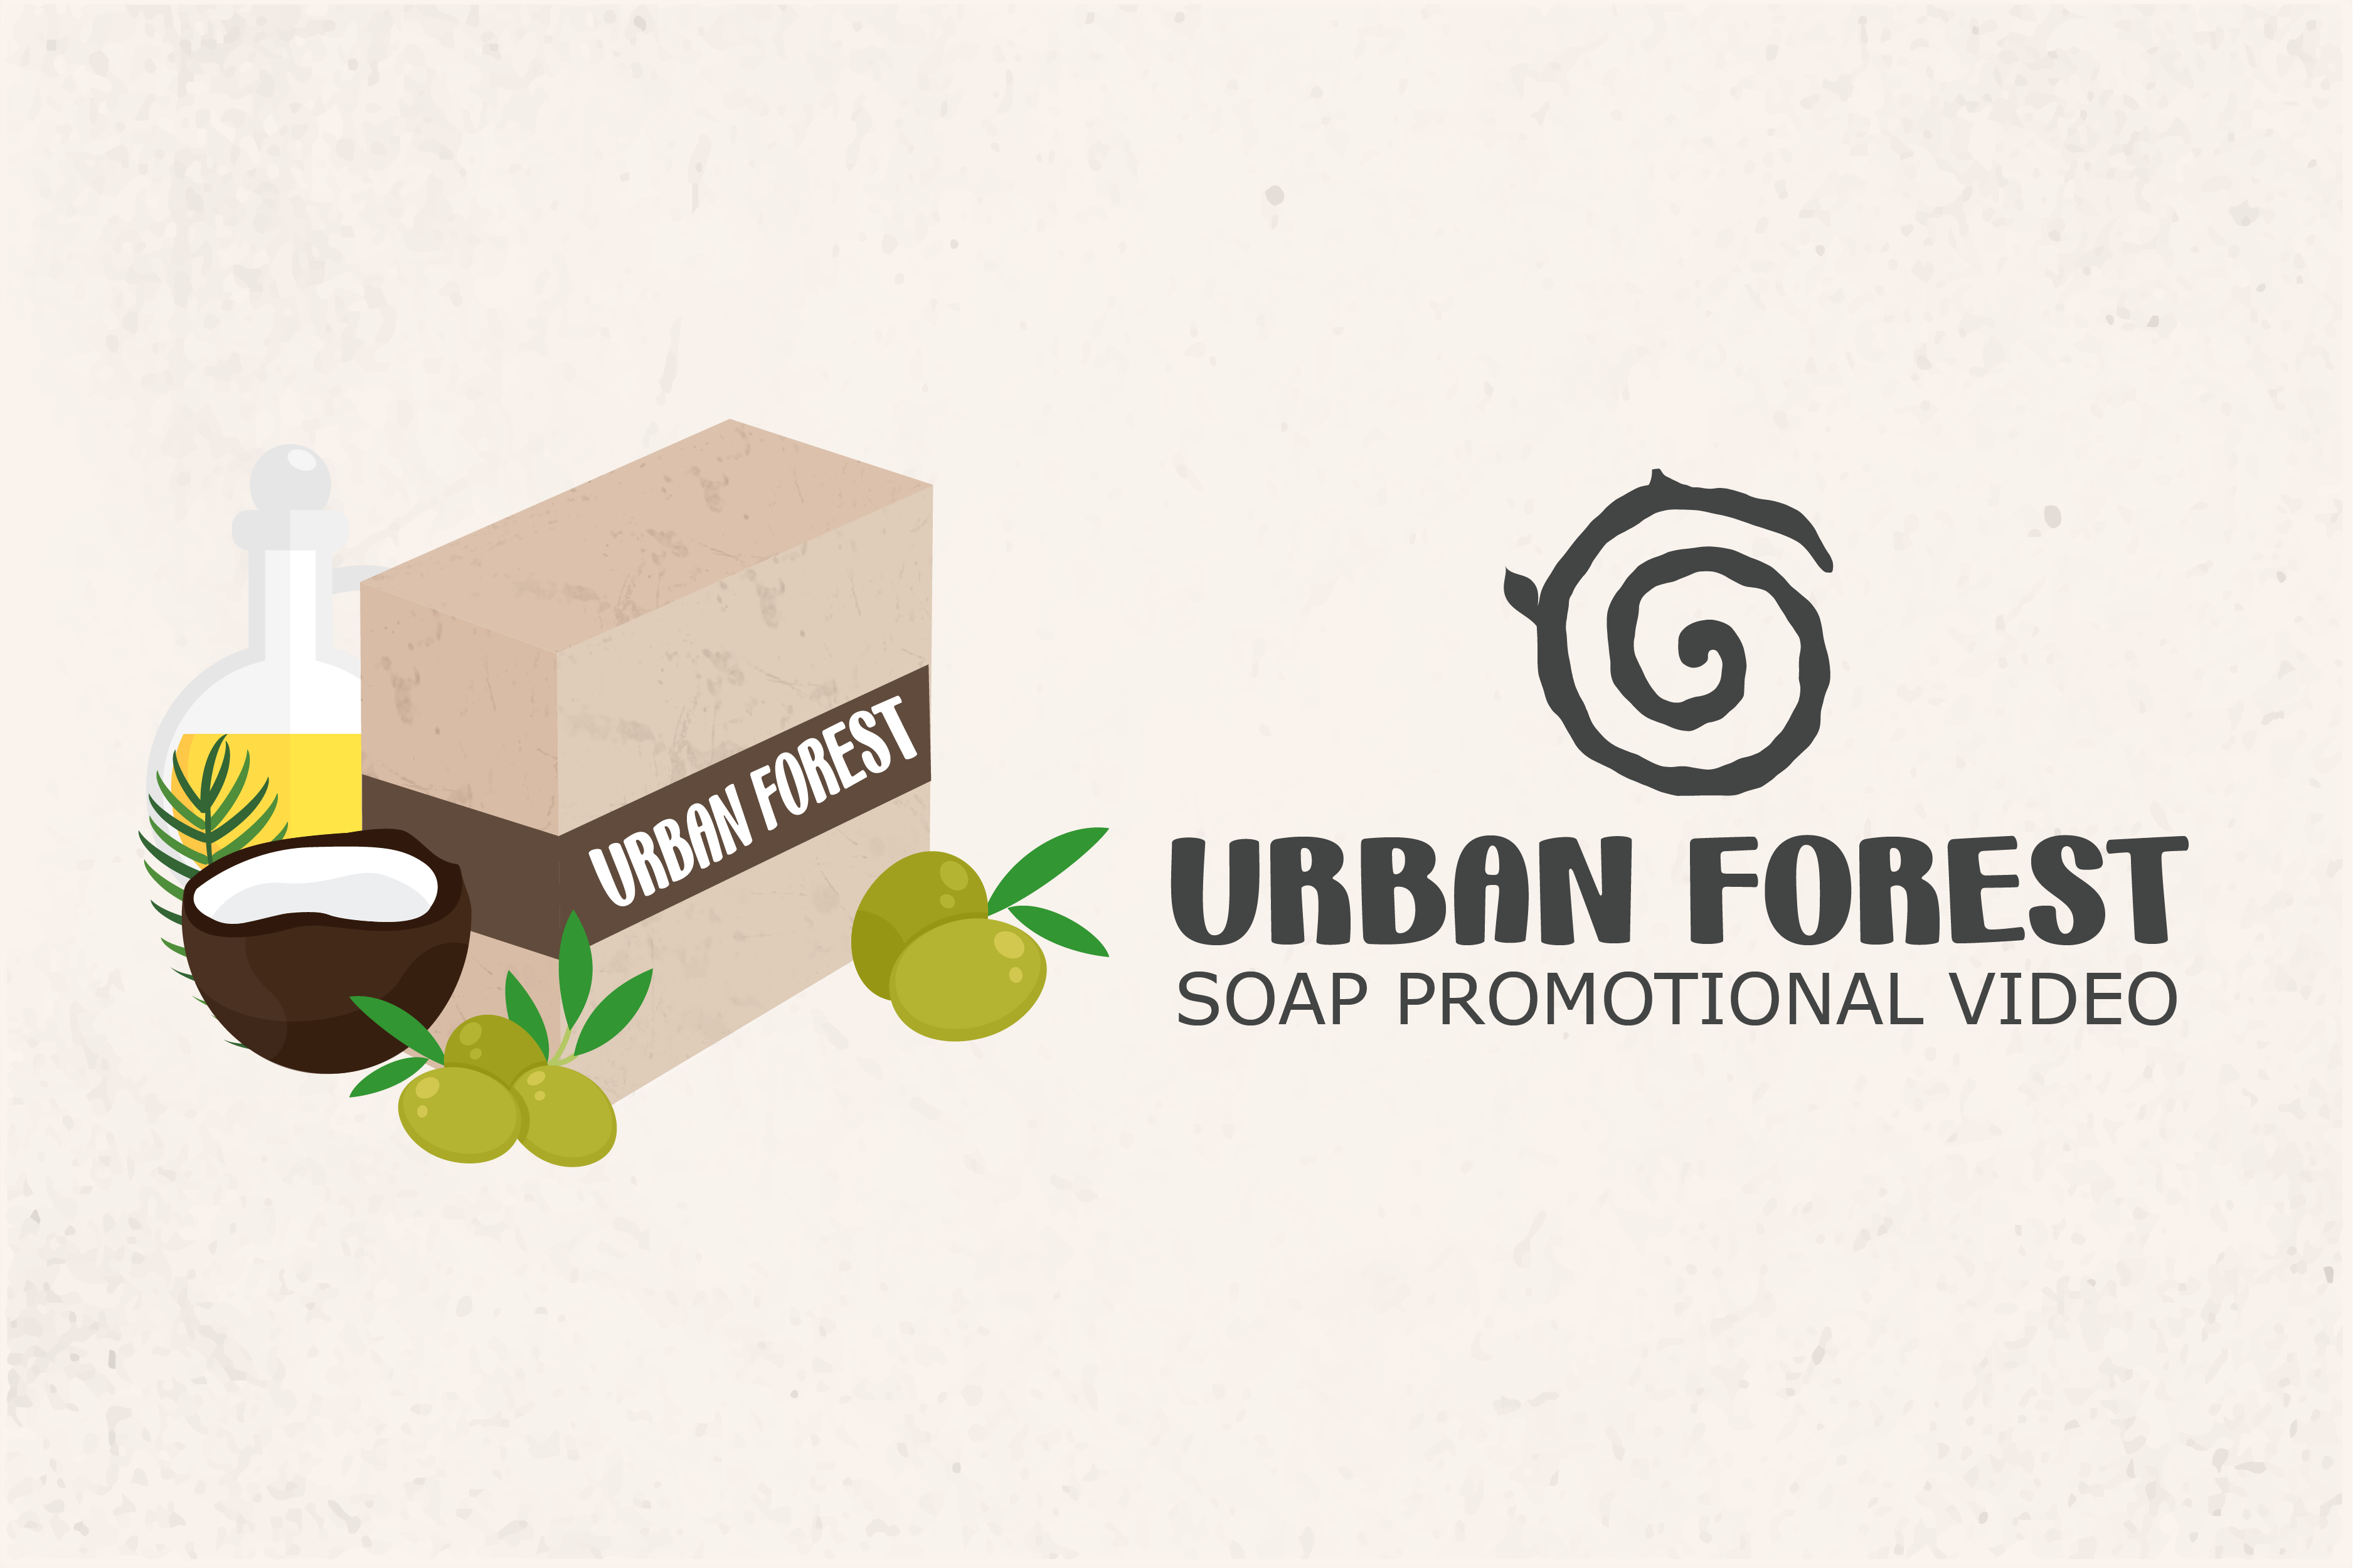 Urban forest soap commercials project banner image. 